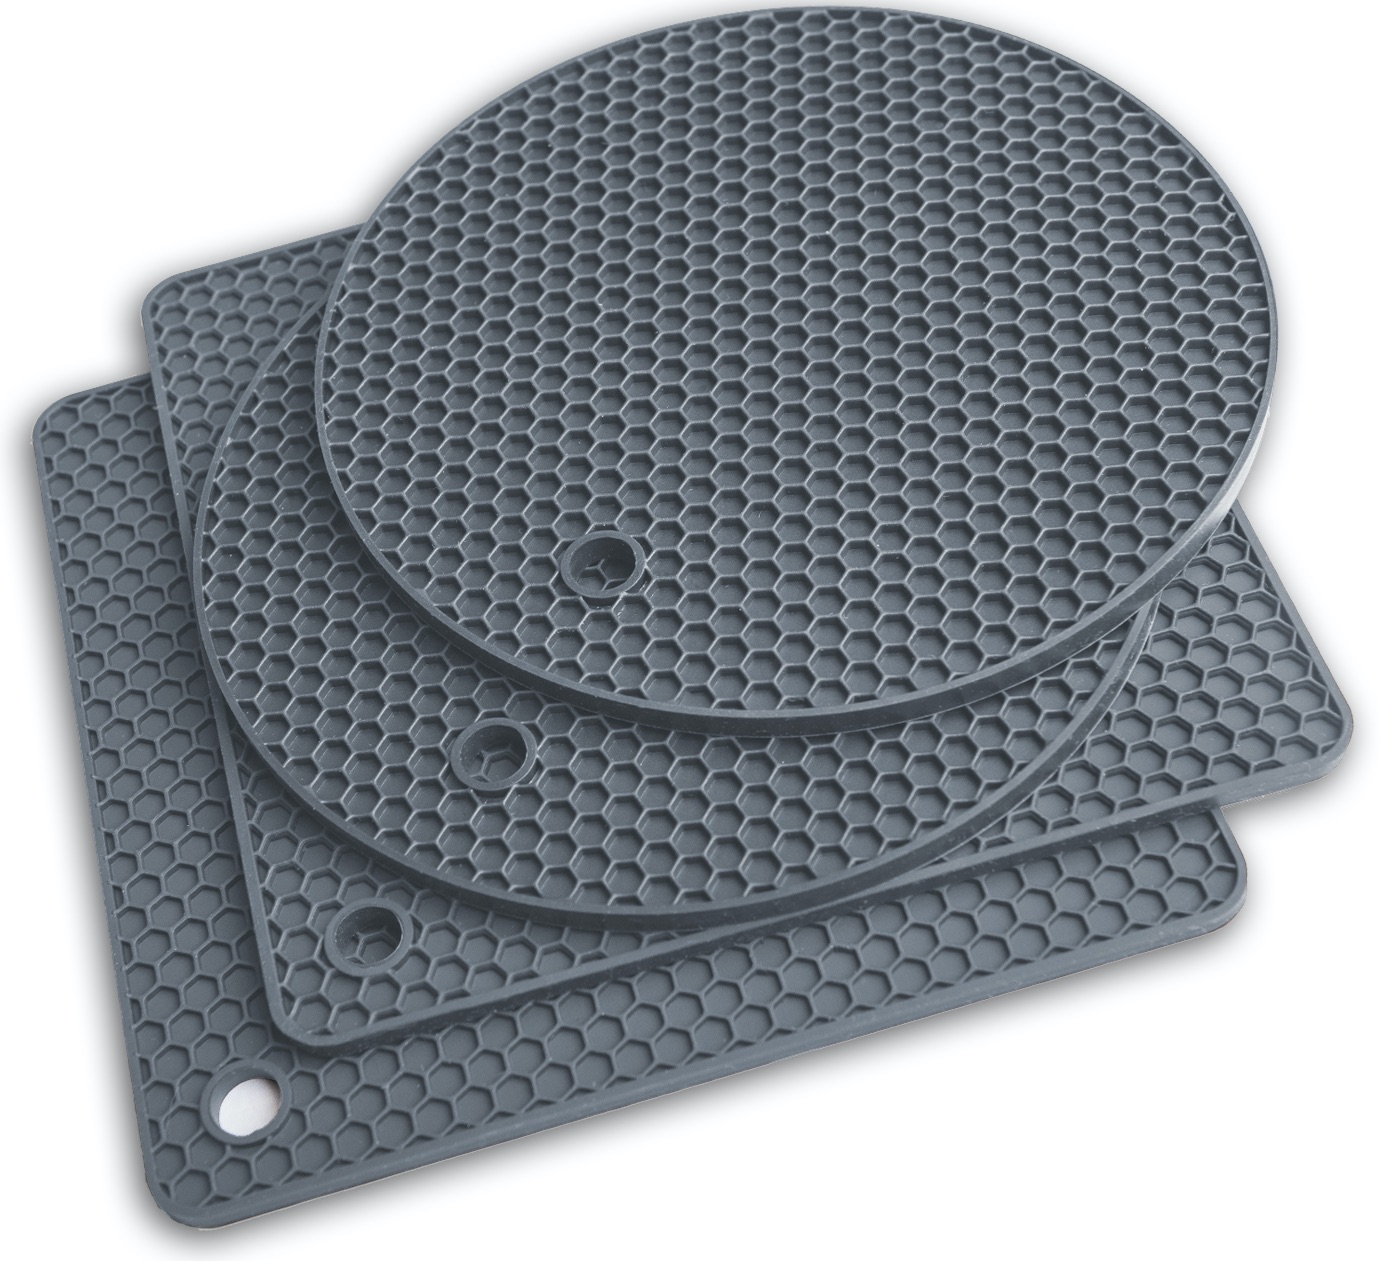 Smithcraft Silicone Trivets Mats Square Silicone Rubber Pot Holder Trivet  Mat for Hot Pan and Pot Hot Pads Counter Mat Heat Resistant Tablemat or